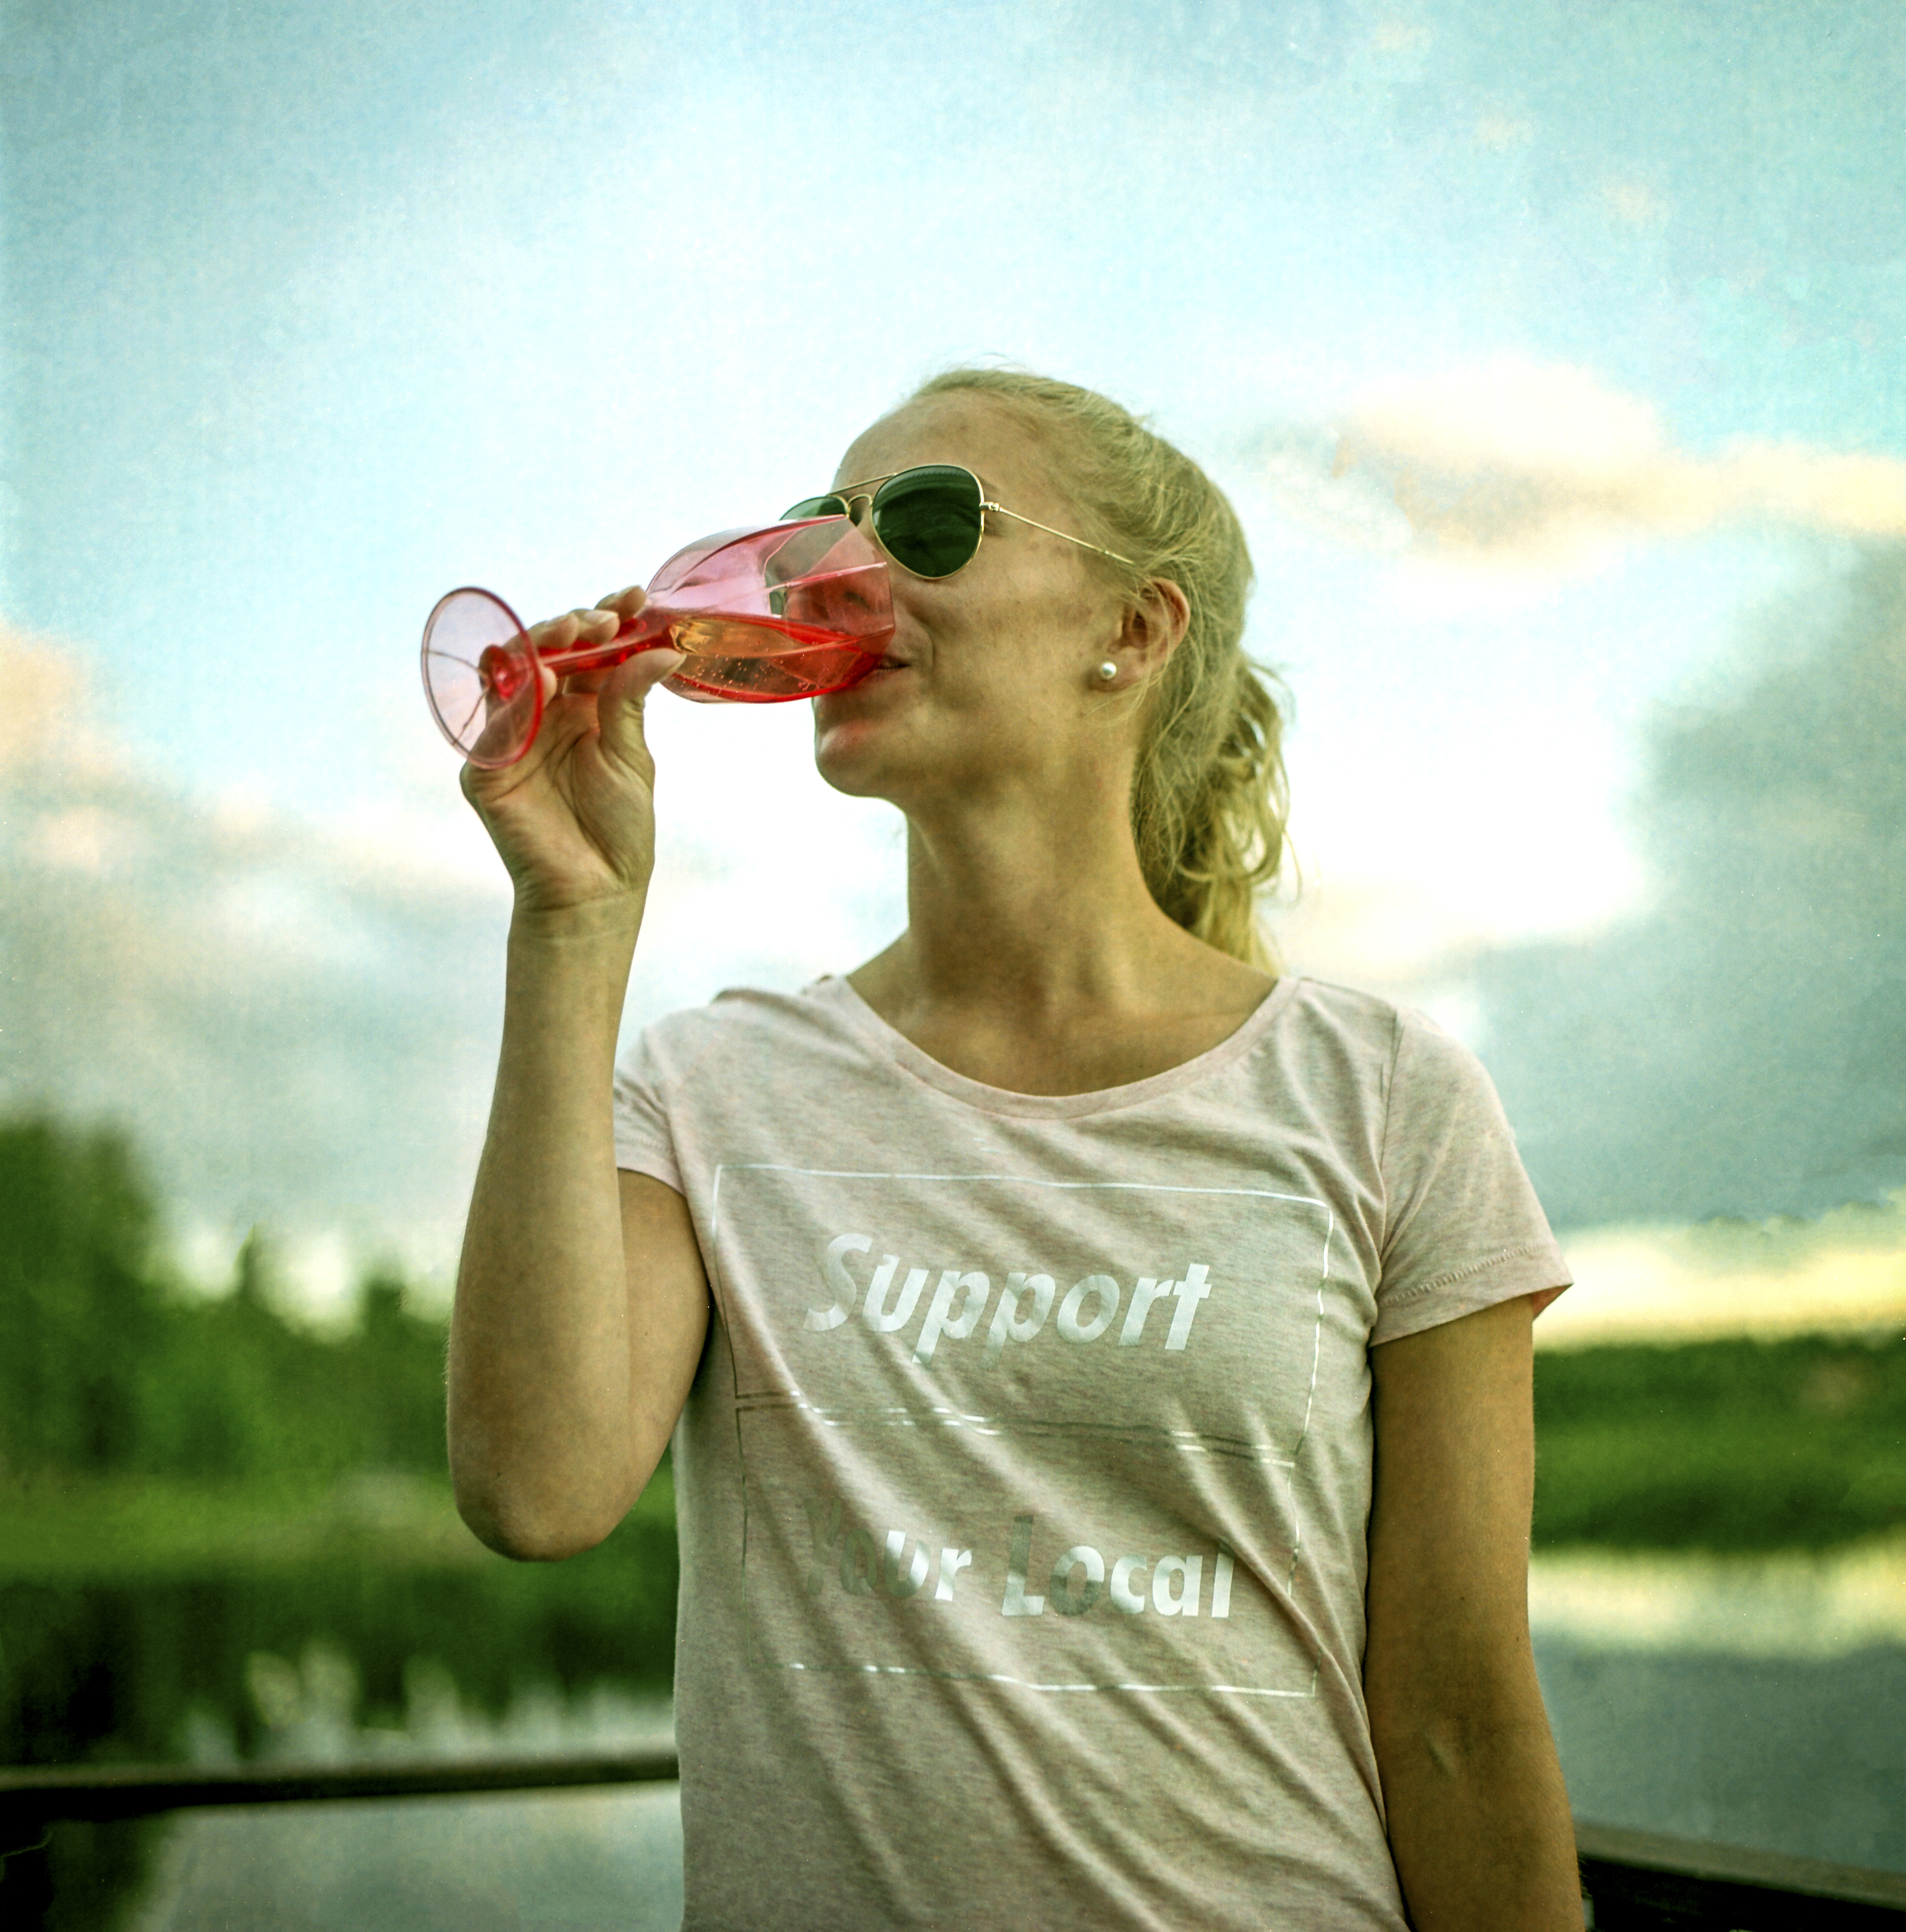 Petra Koskela sips wine at the Ukkohalla resort, where many participating in the Swamp Soccer World Championships stayed, in Hyrynsalmi, Finland, in July of 2017. More than 2,000 people ventured to the remote backwaters of central Finland recently for the 20th annual Swamp Soccer World Championships, further proof of the country's growing penchant for screwball sports competitions. (Janne Krkk/The New York Times)